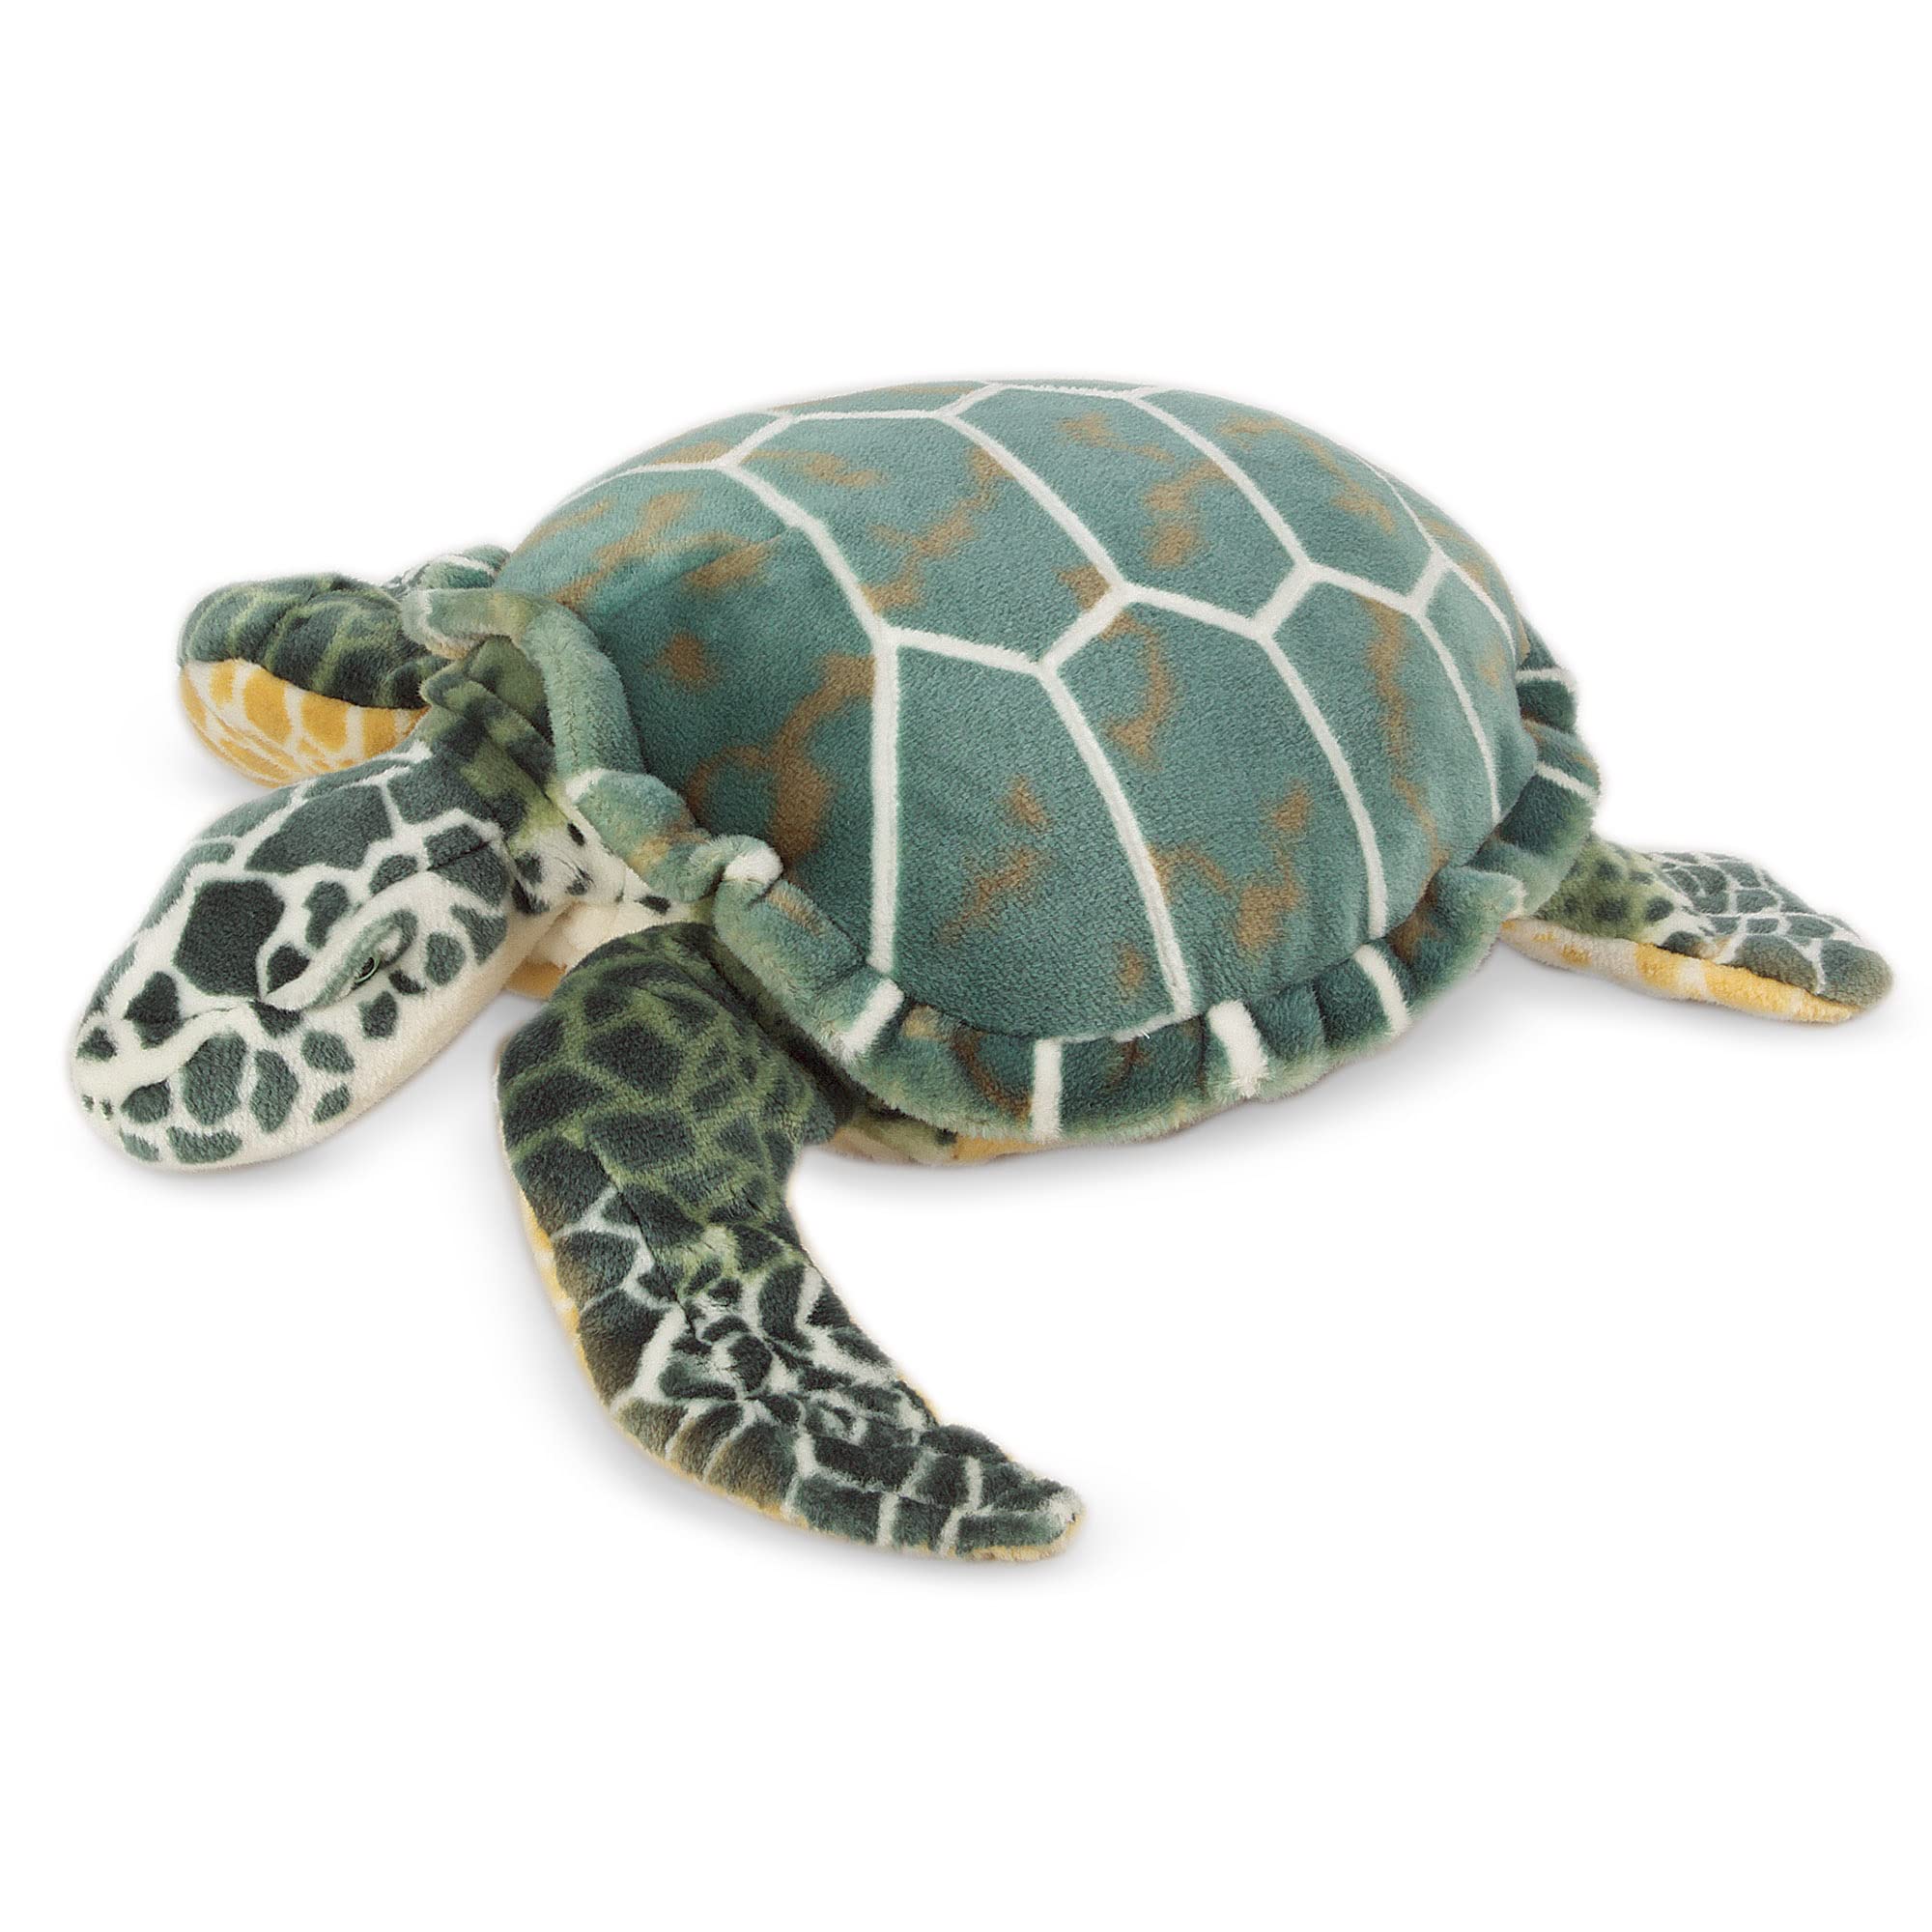 Melissa & Doug Sea Turtle - Plush | Soft Toy | Animal | All Ages | Gift for Boy or Girl